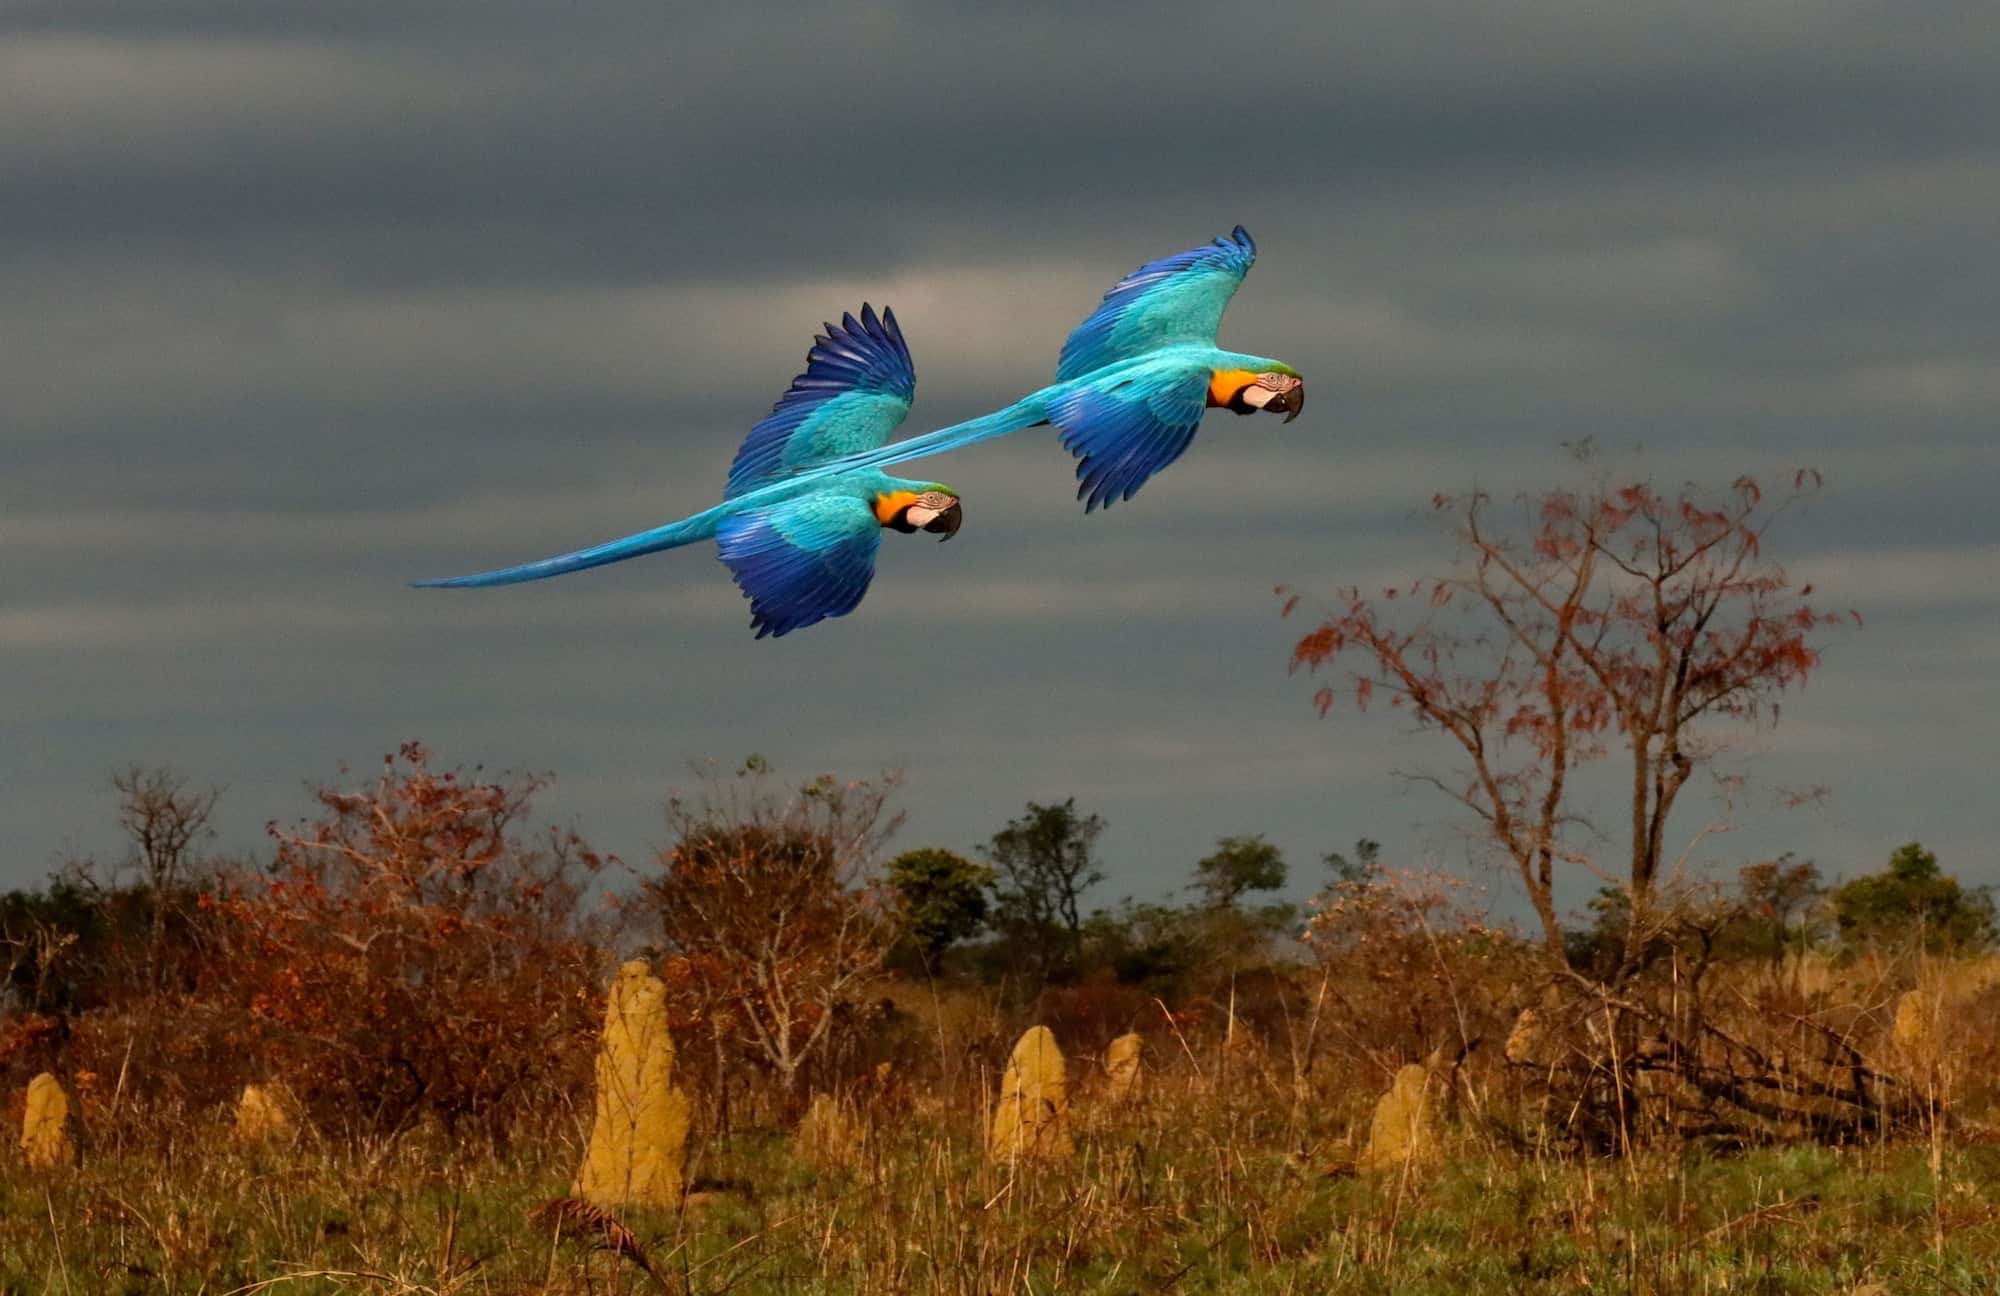 This photographer captures birds as poetry in motion